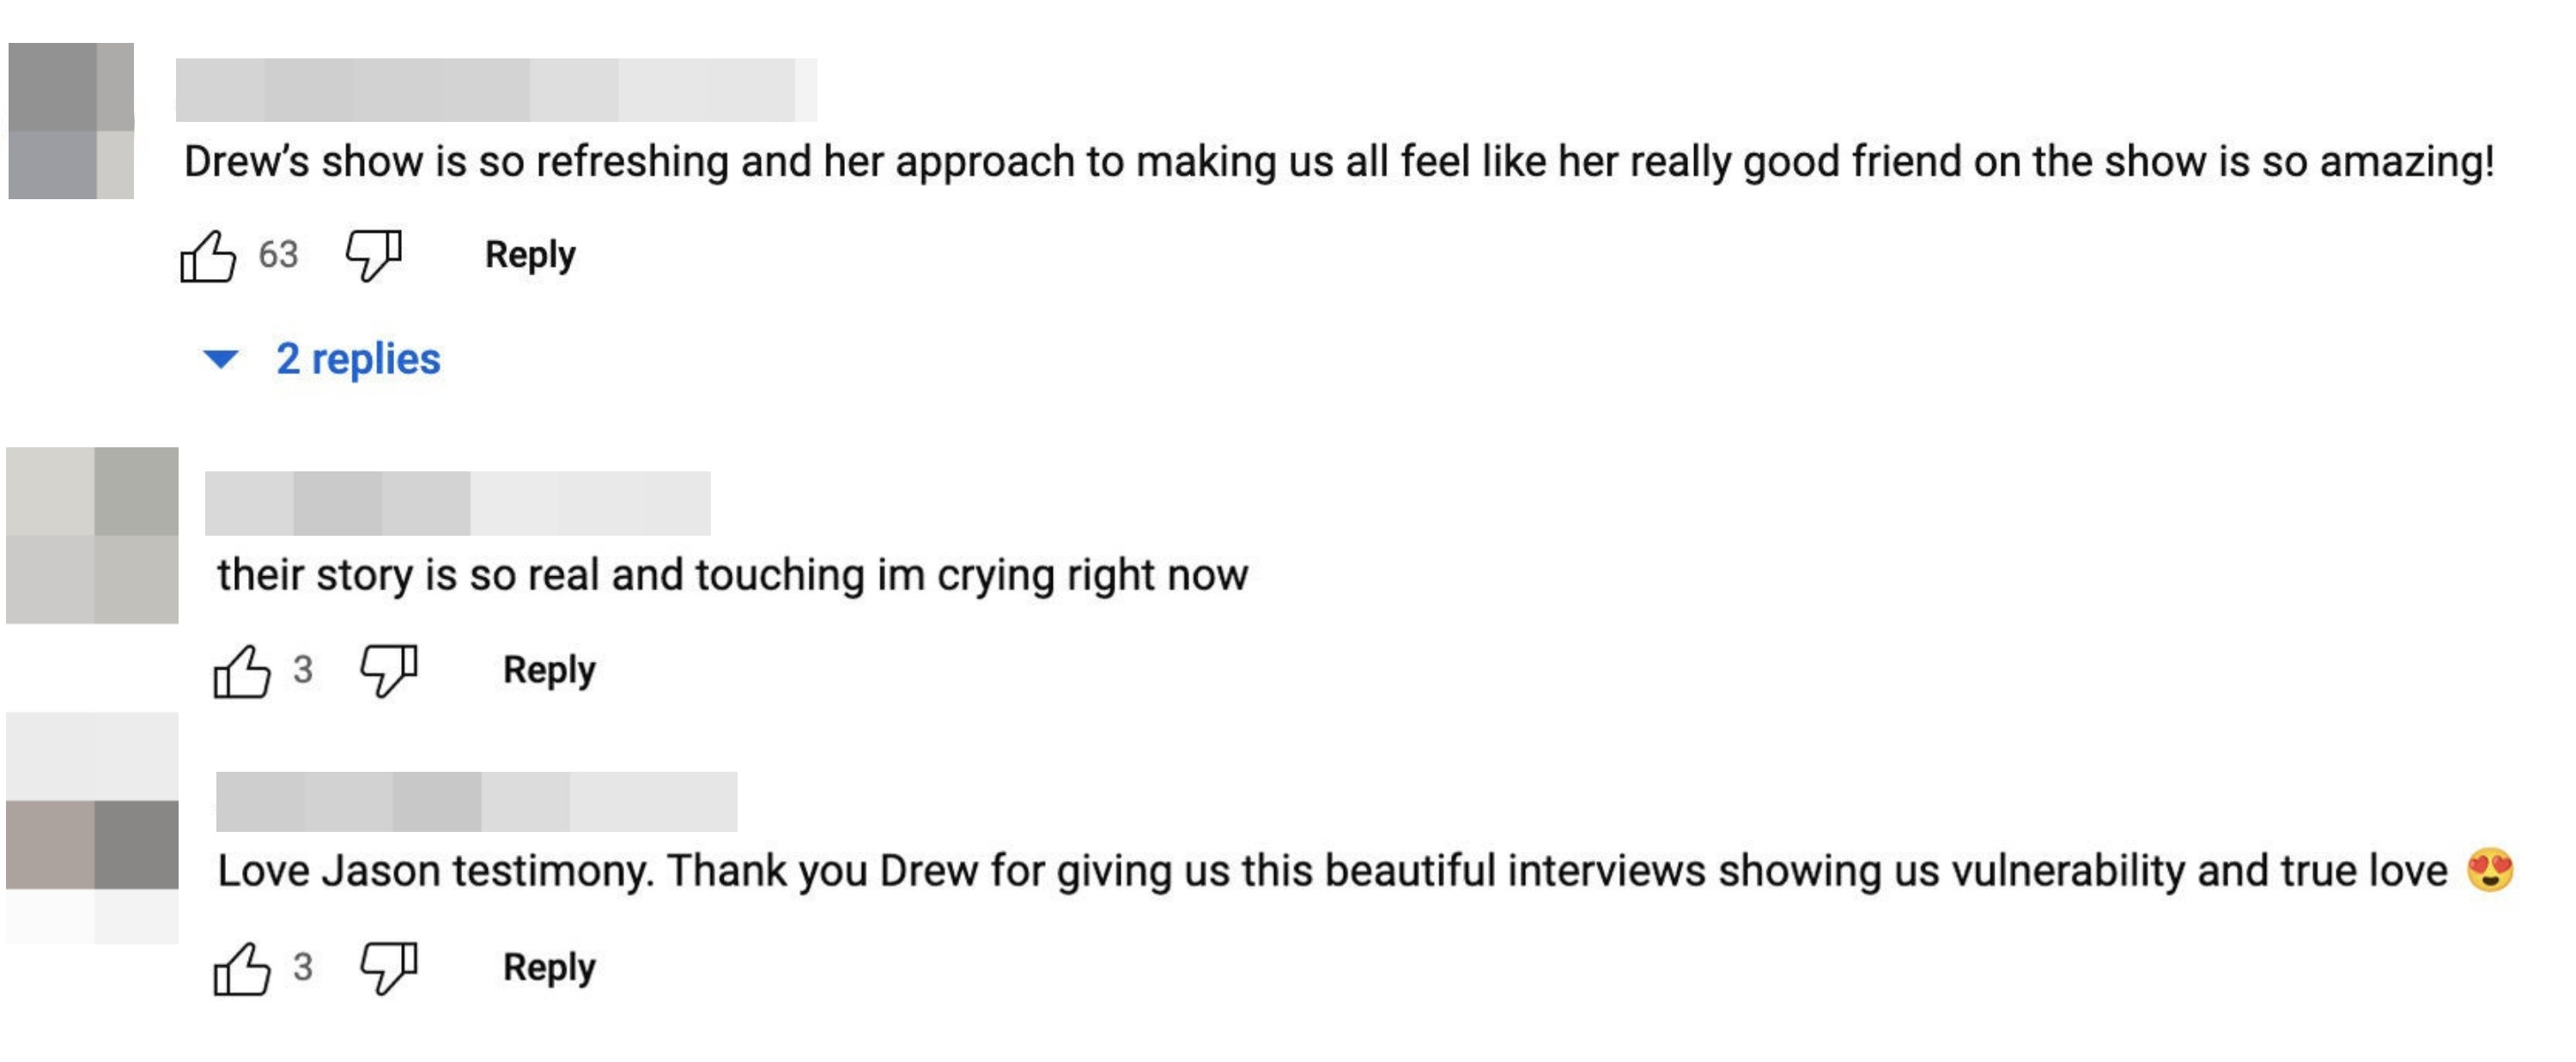 Comments on YouTube, including &quot;Drew&#x27;s show is so refreshing,&quot; &quot;their story is so real and touching,&quot; and &quot;Thank you Drew for giving us this beautiful interview showing us vulnerability and true love&quot;